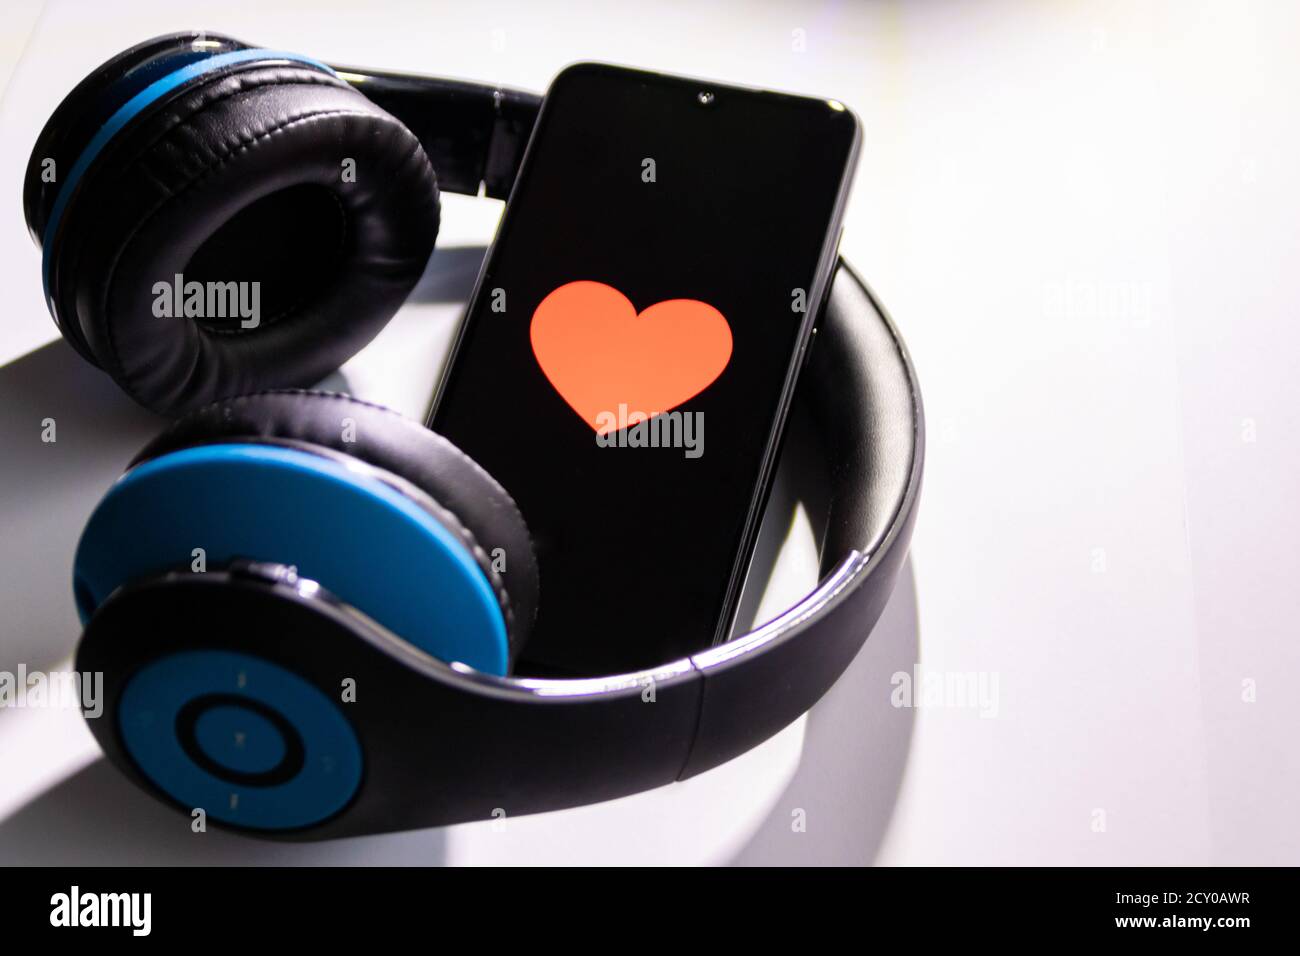 Black smartphone with red heart on the black screen and a cordless blue over ear headphone show mobile music streaming, health control and smartphone Stock Photo